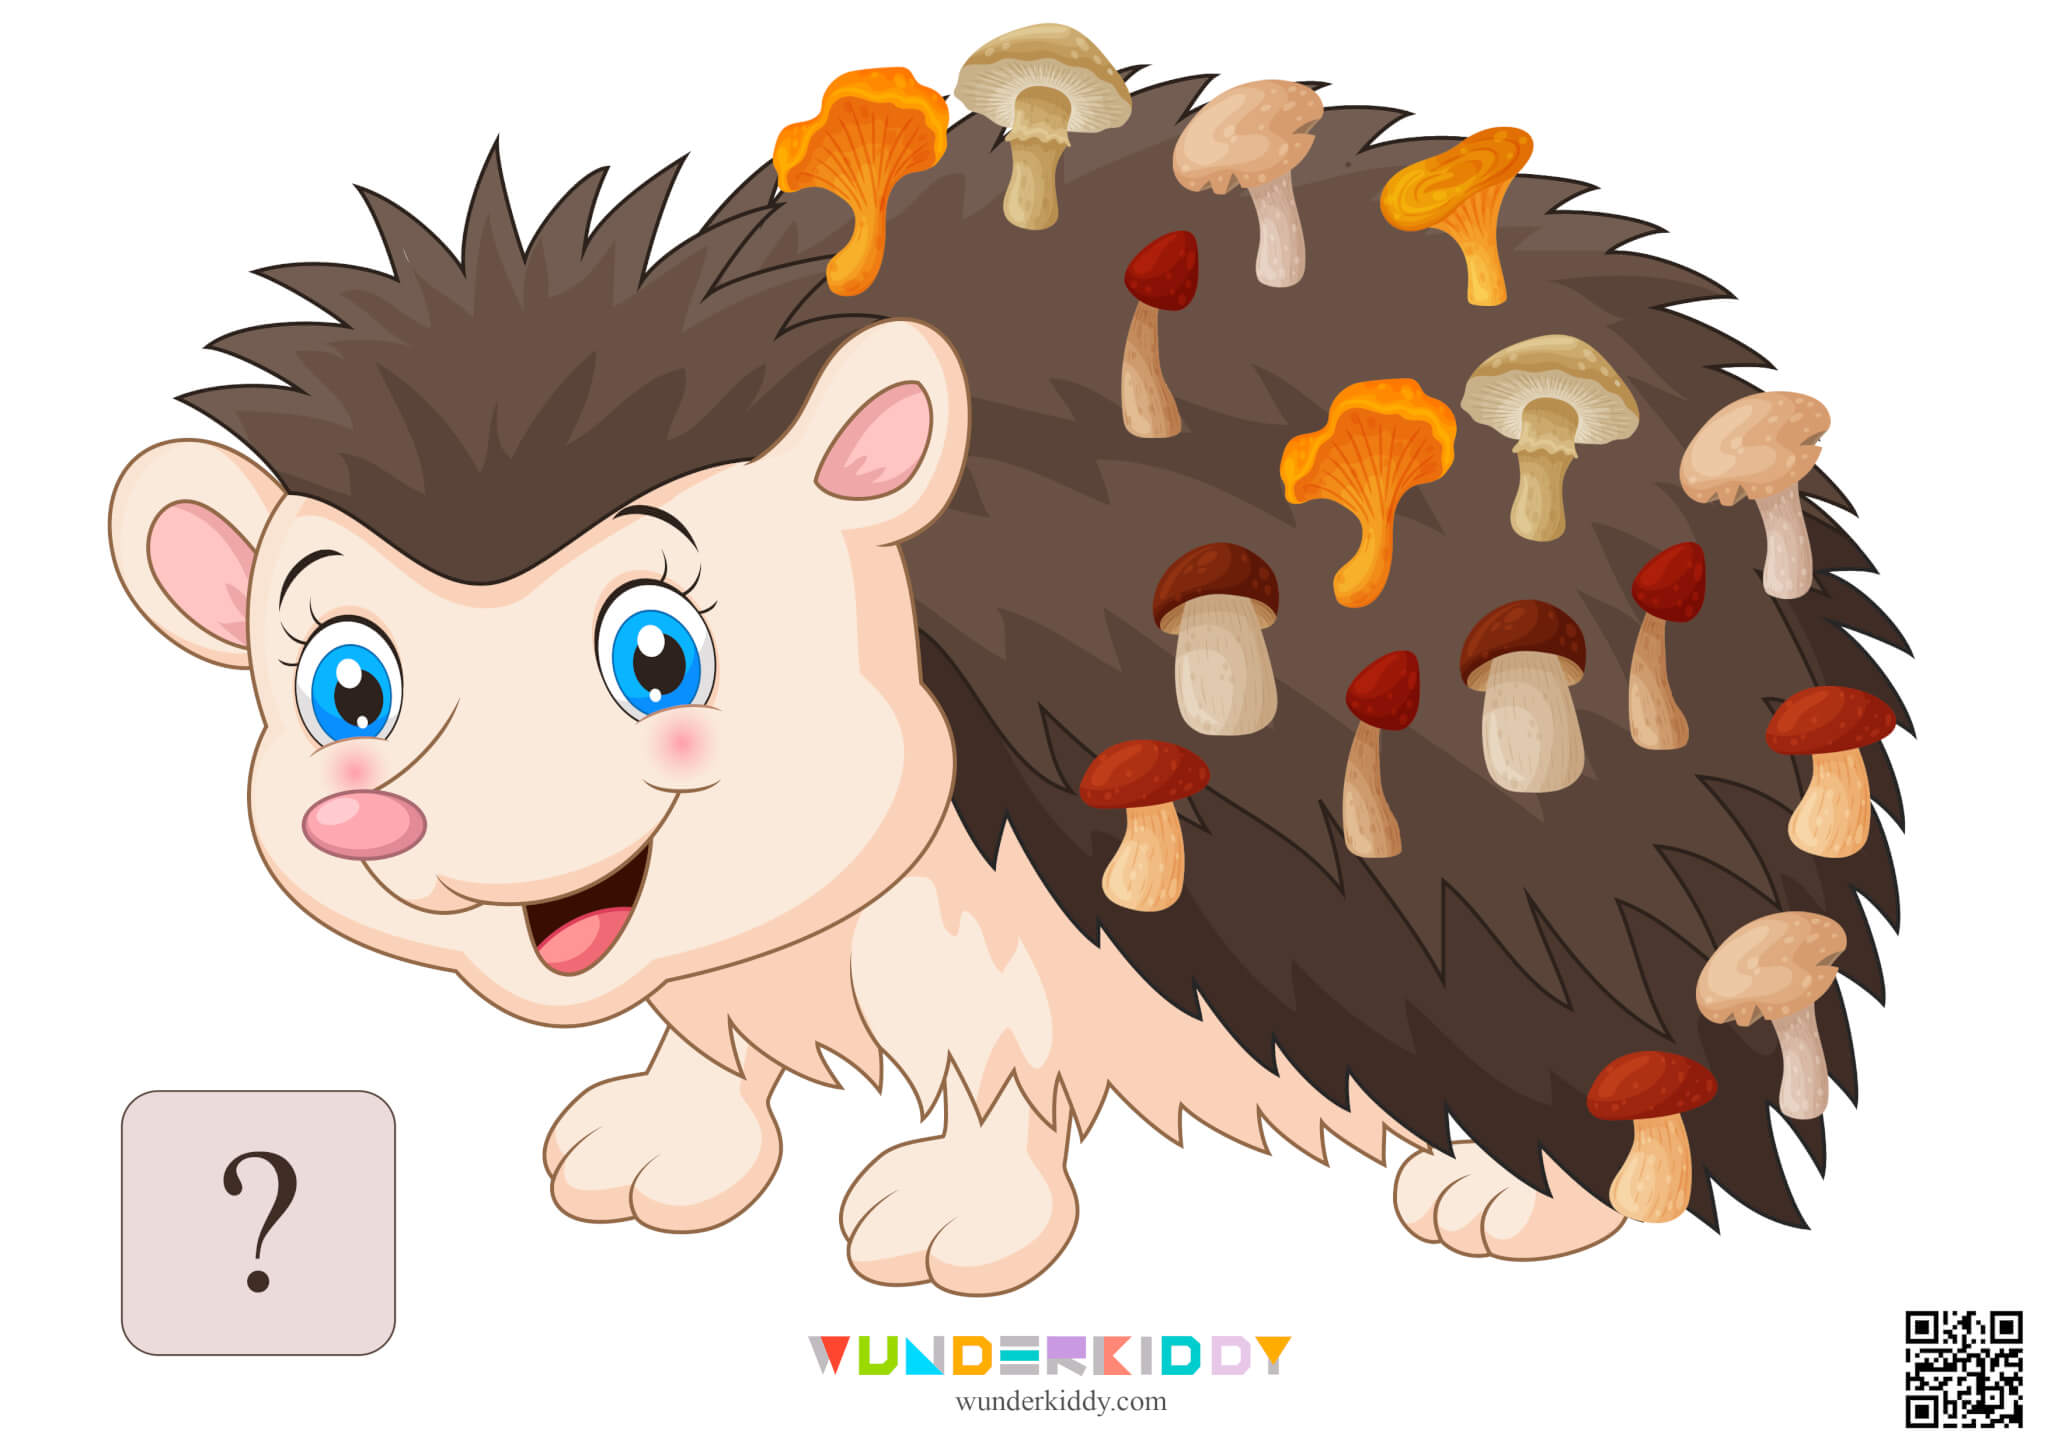 Worksheet Count to 20 with Hedgehog and Mushrooms - Image 20